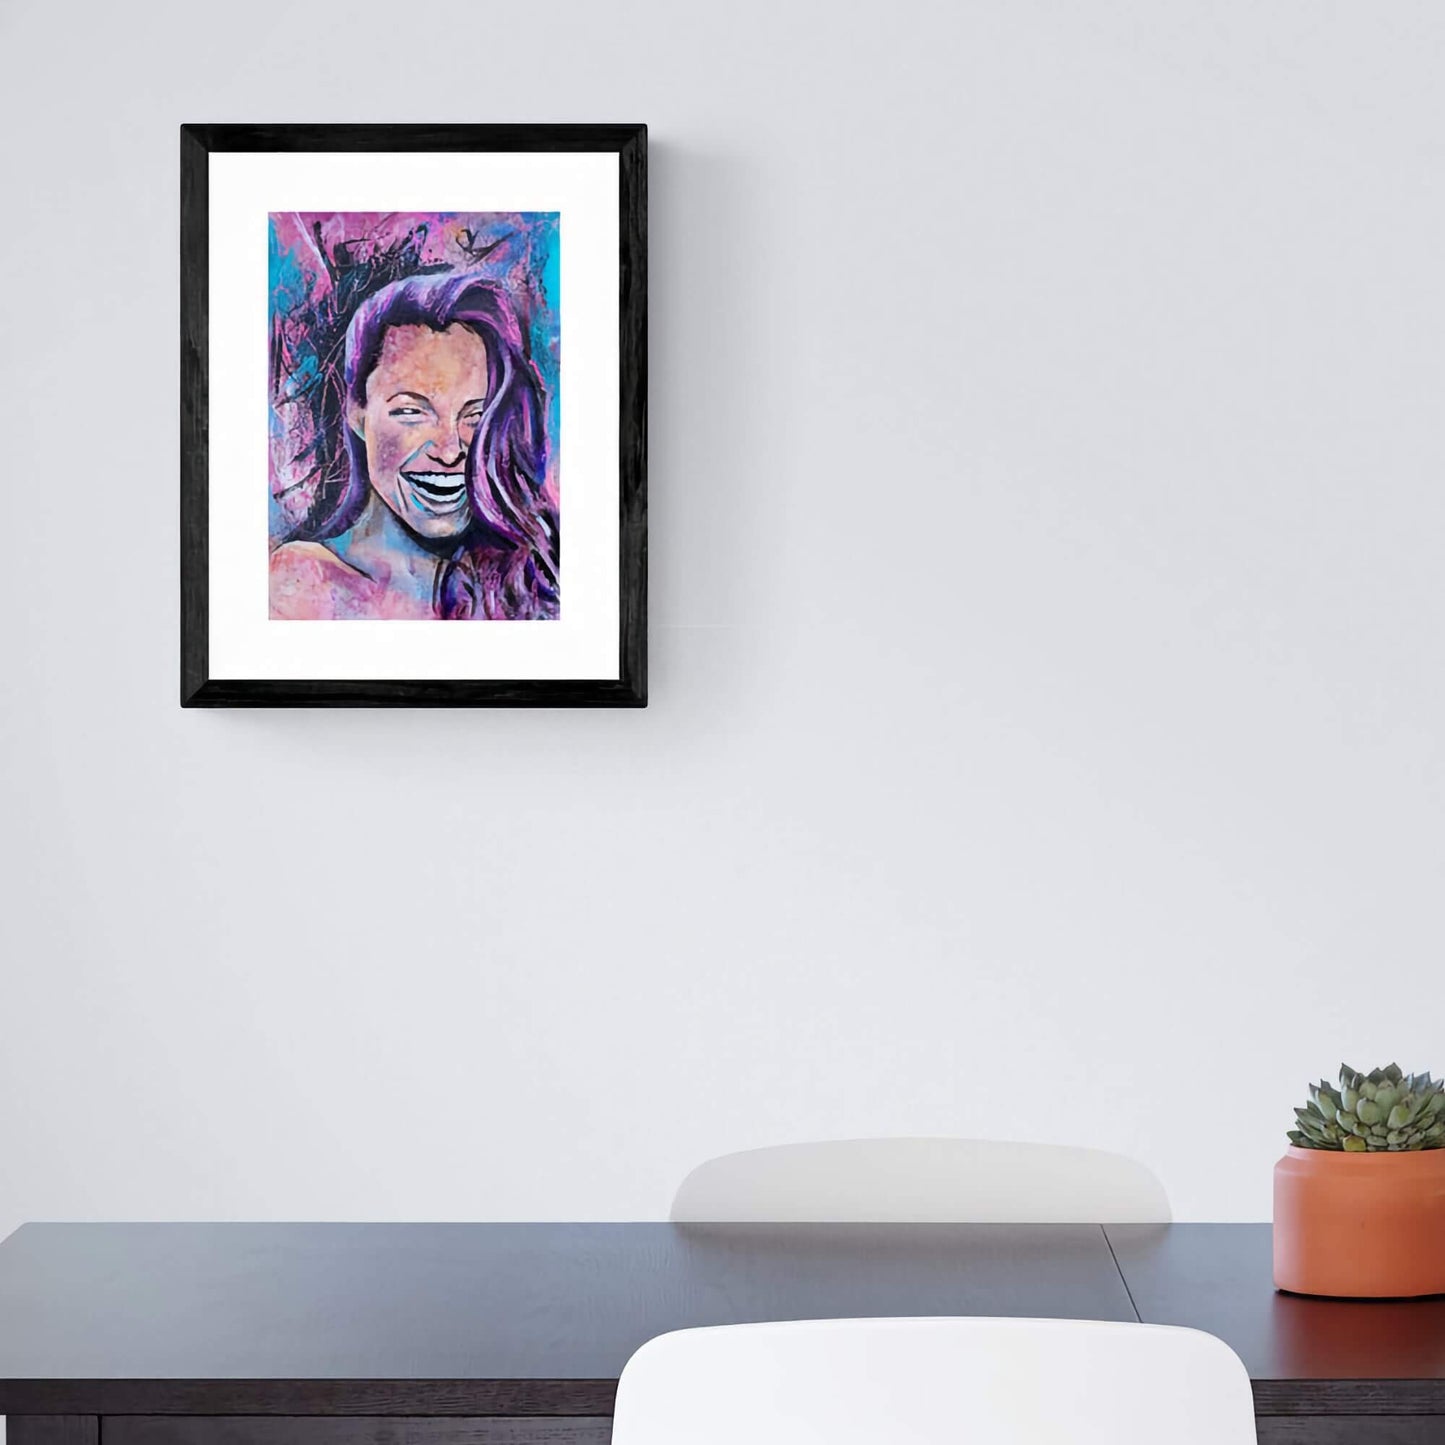 art wall painting, colourful painting of a woman Angelina Jolie Fan art, woman laughing painting pink purple blue